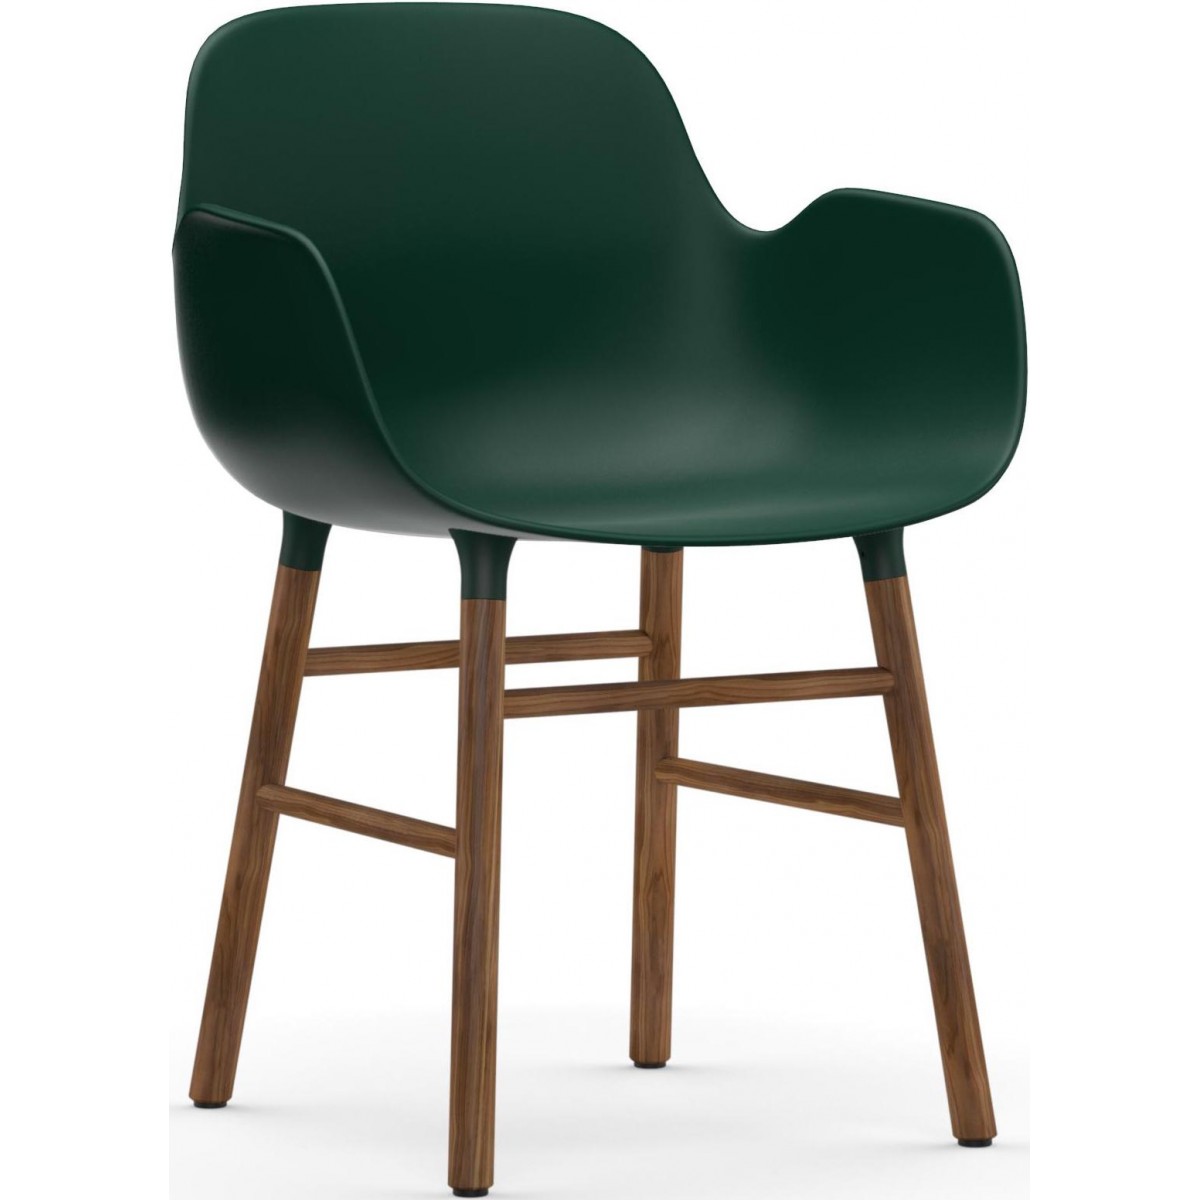 Green / Walnut – Form Chair with armrests